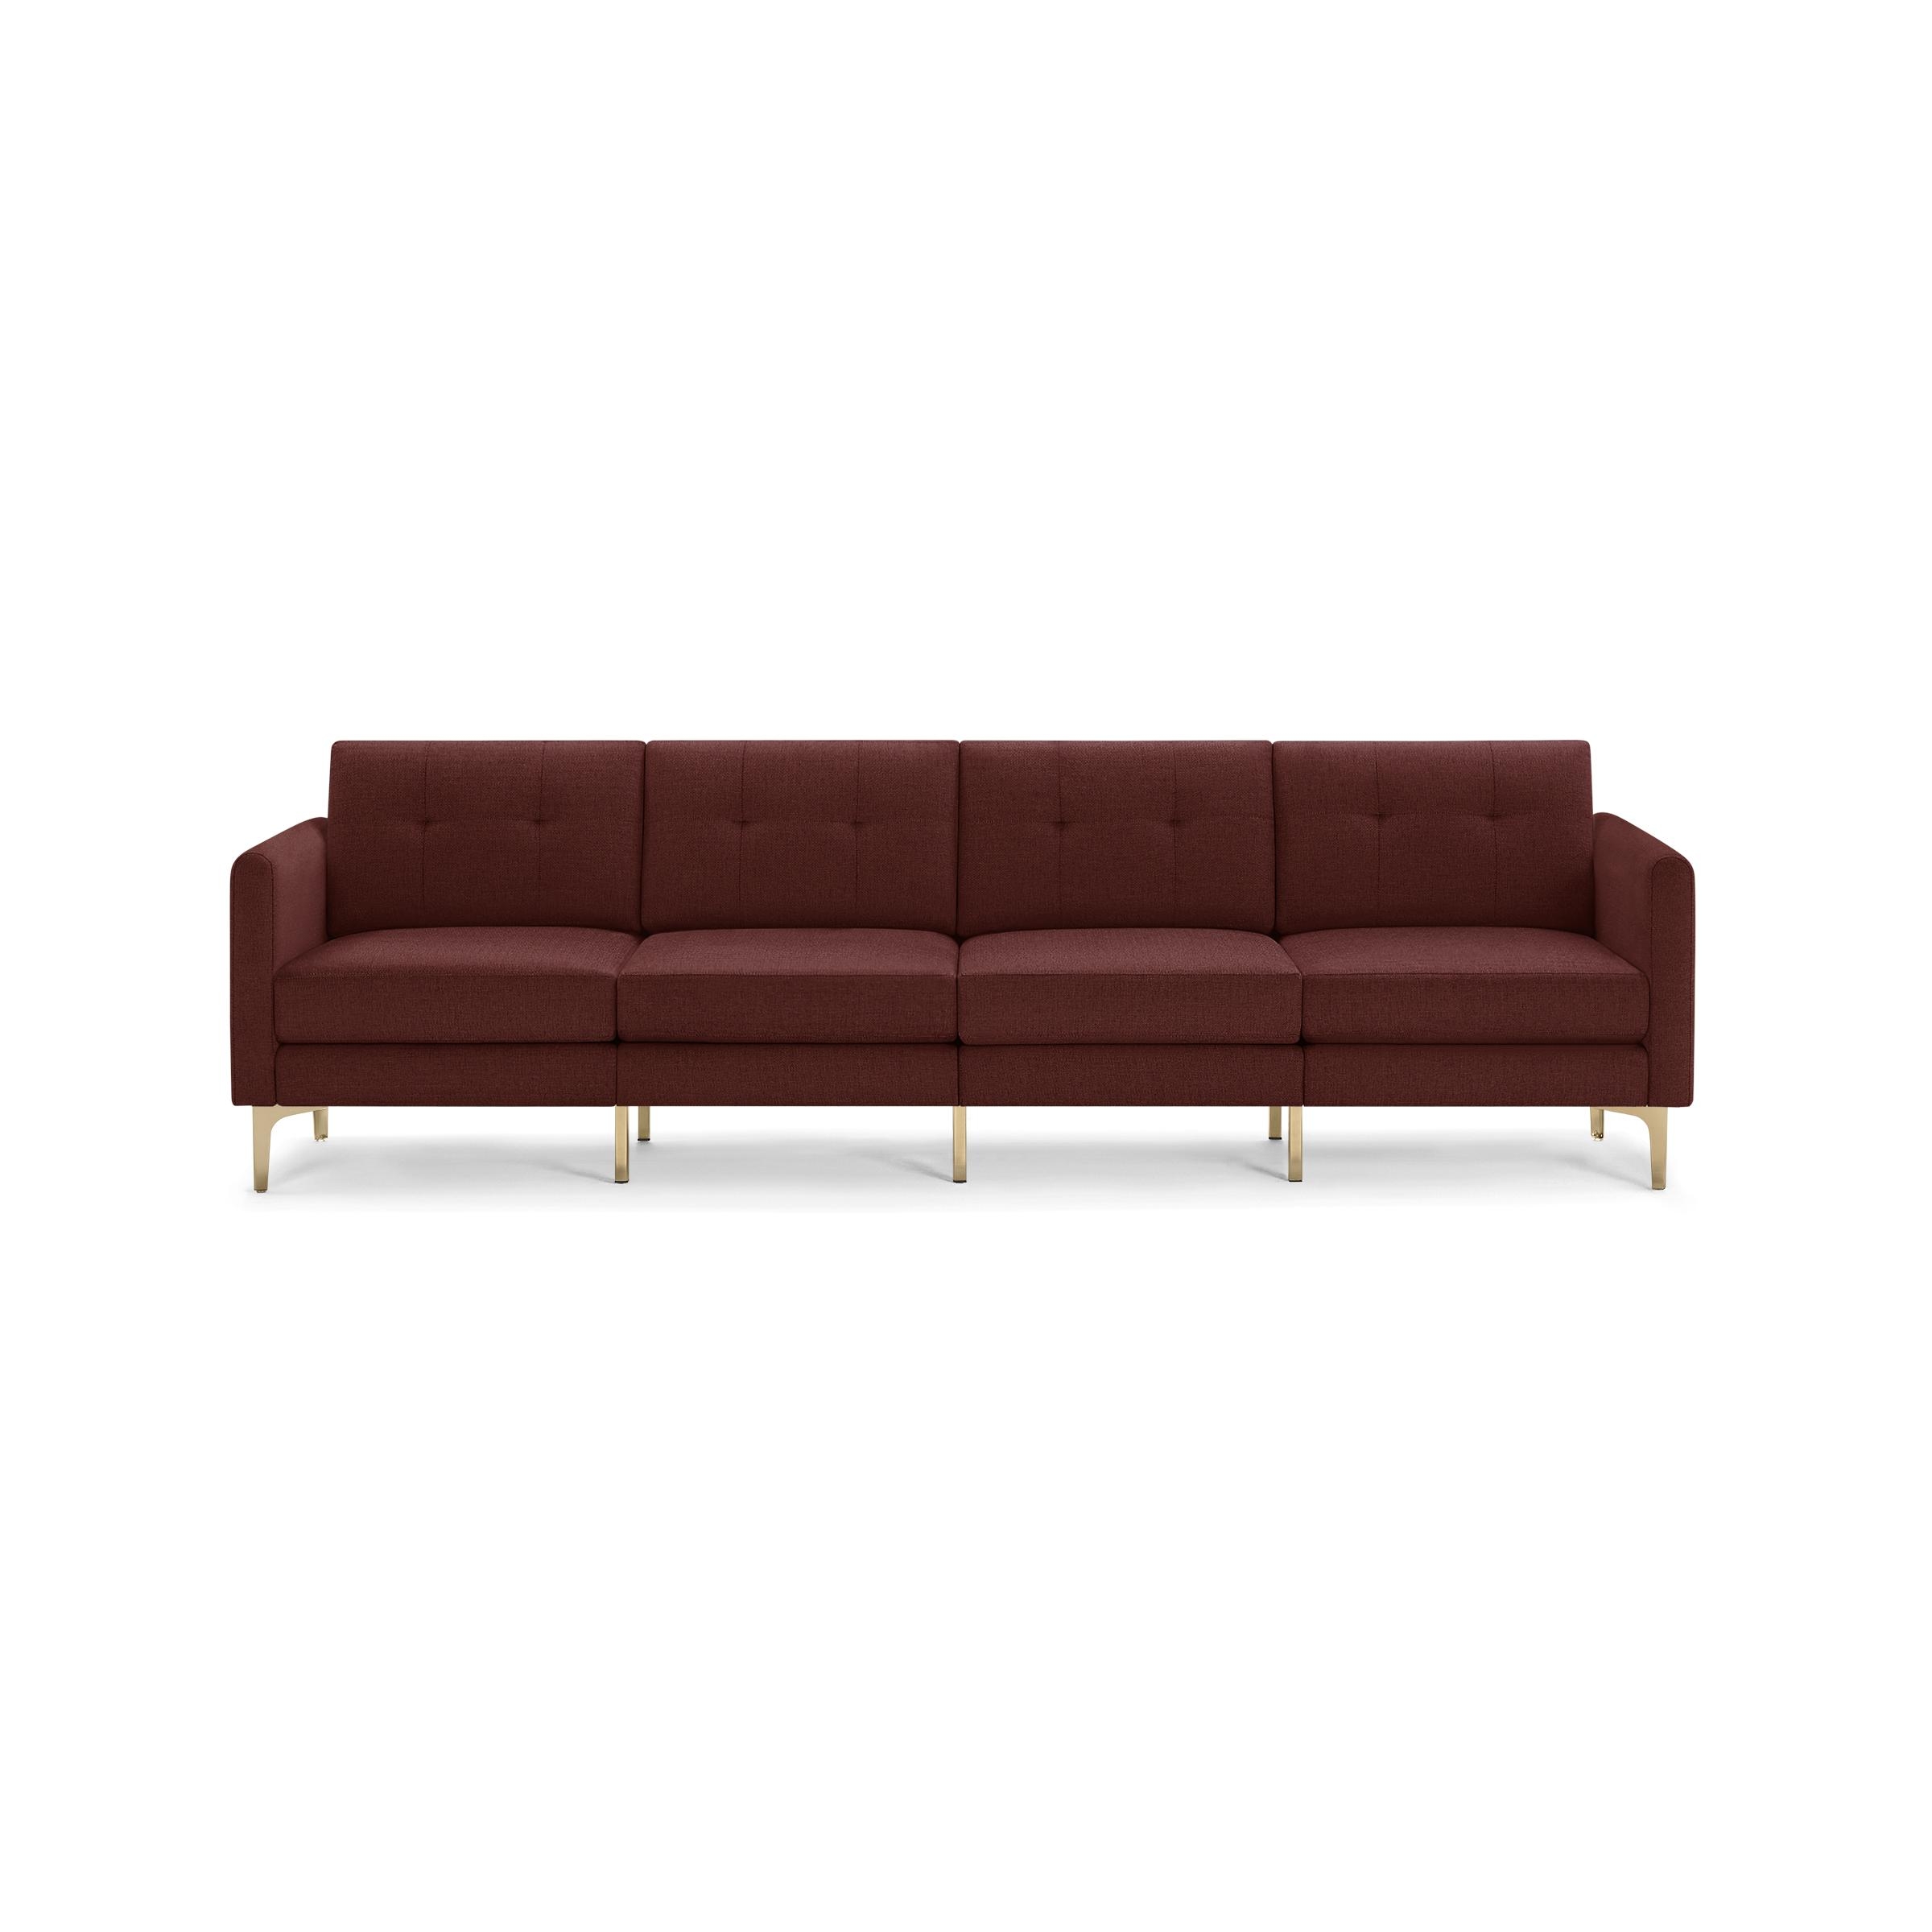 Nomad King Sofa in Brick Red, Brass Legs - Image 0